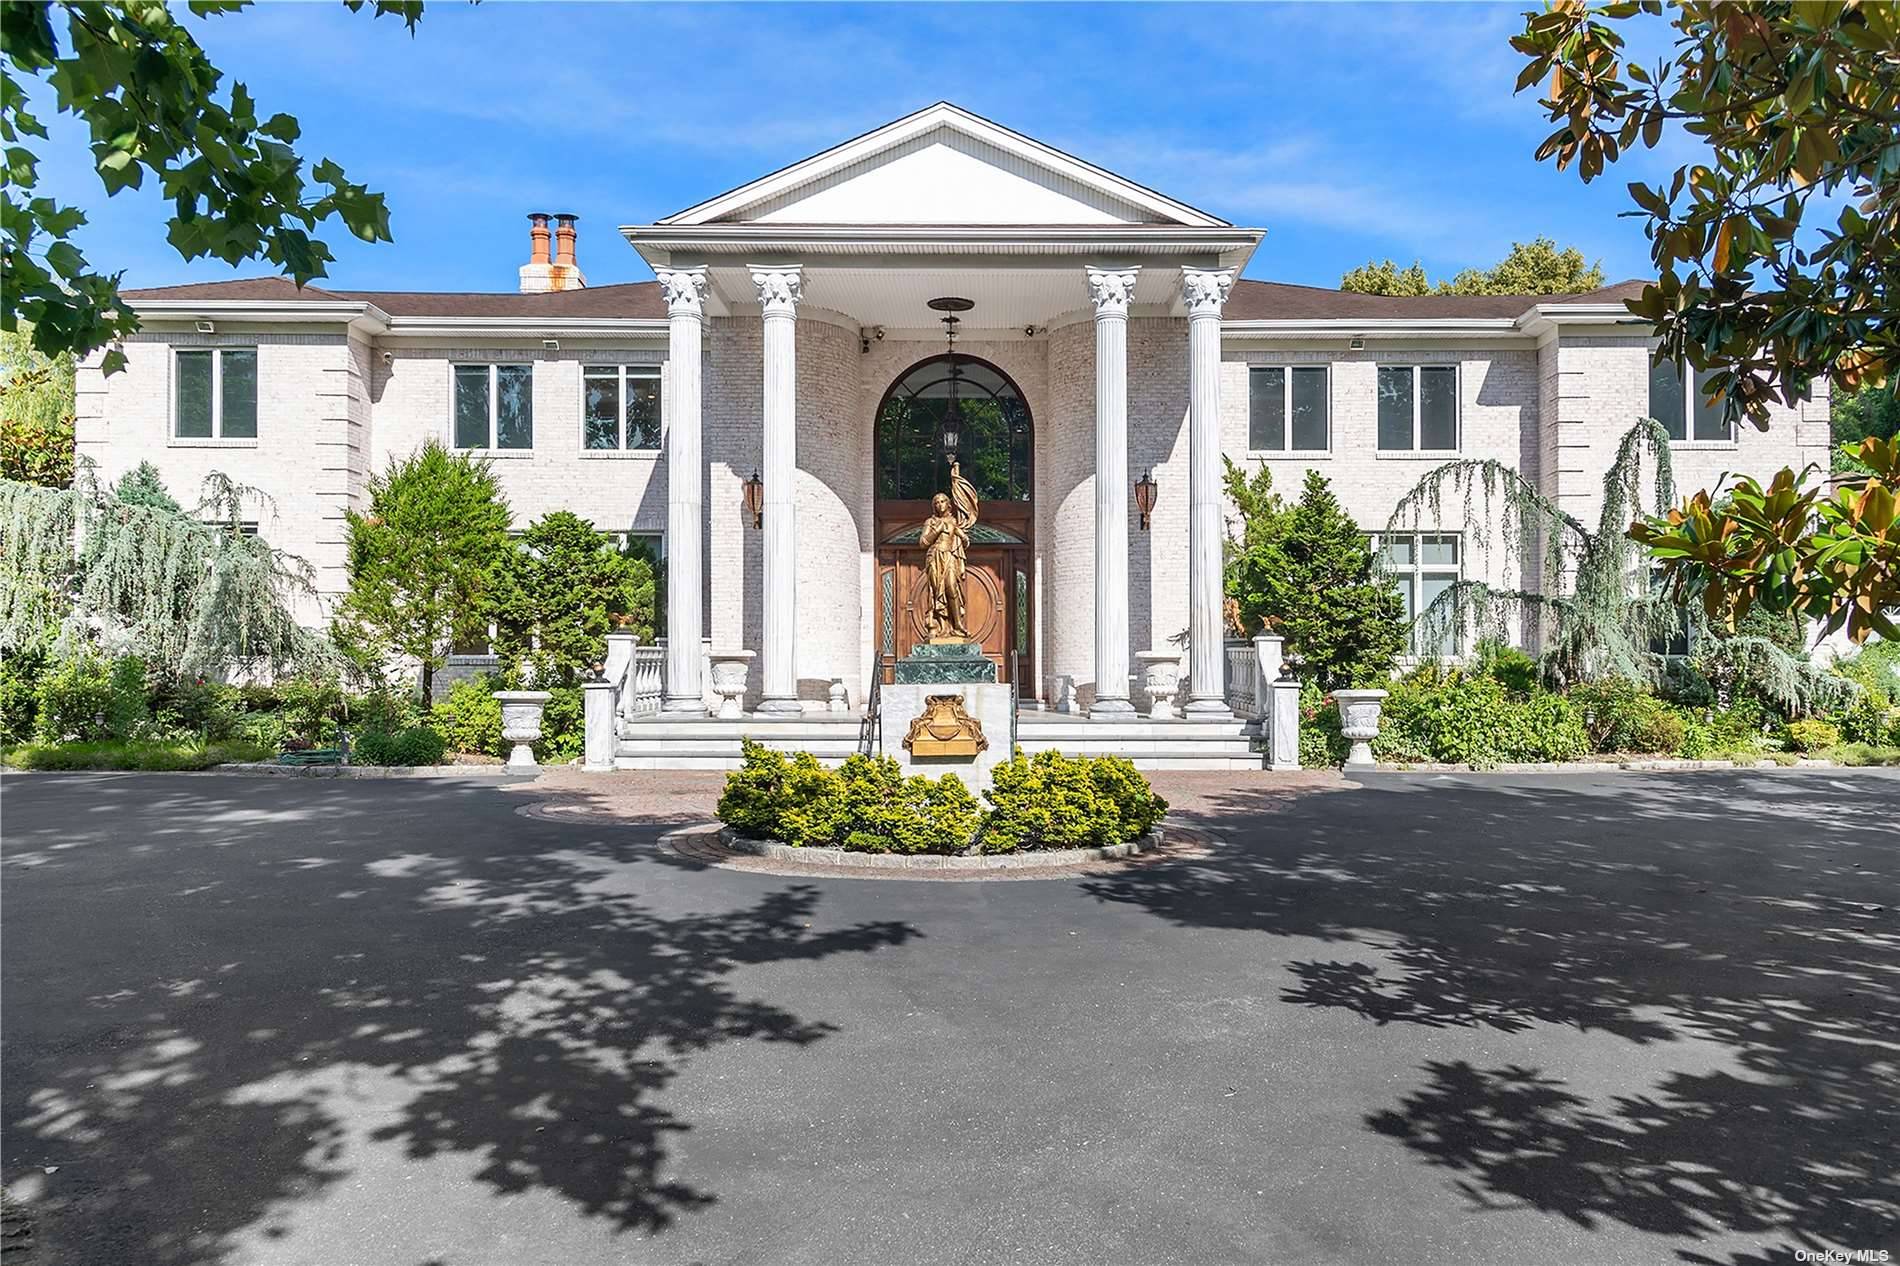 BY APPOINTMENT ONLY. Radiating the classic splendor of a Grecian villa, this magnificent 7 BR, 10 BA, 10, 000 Sq.